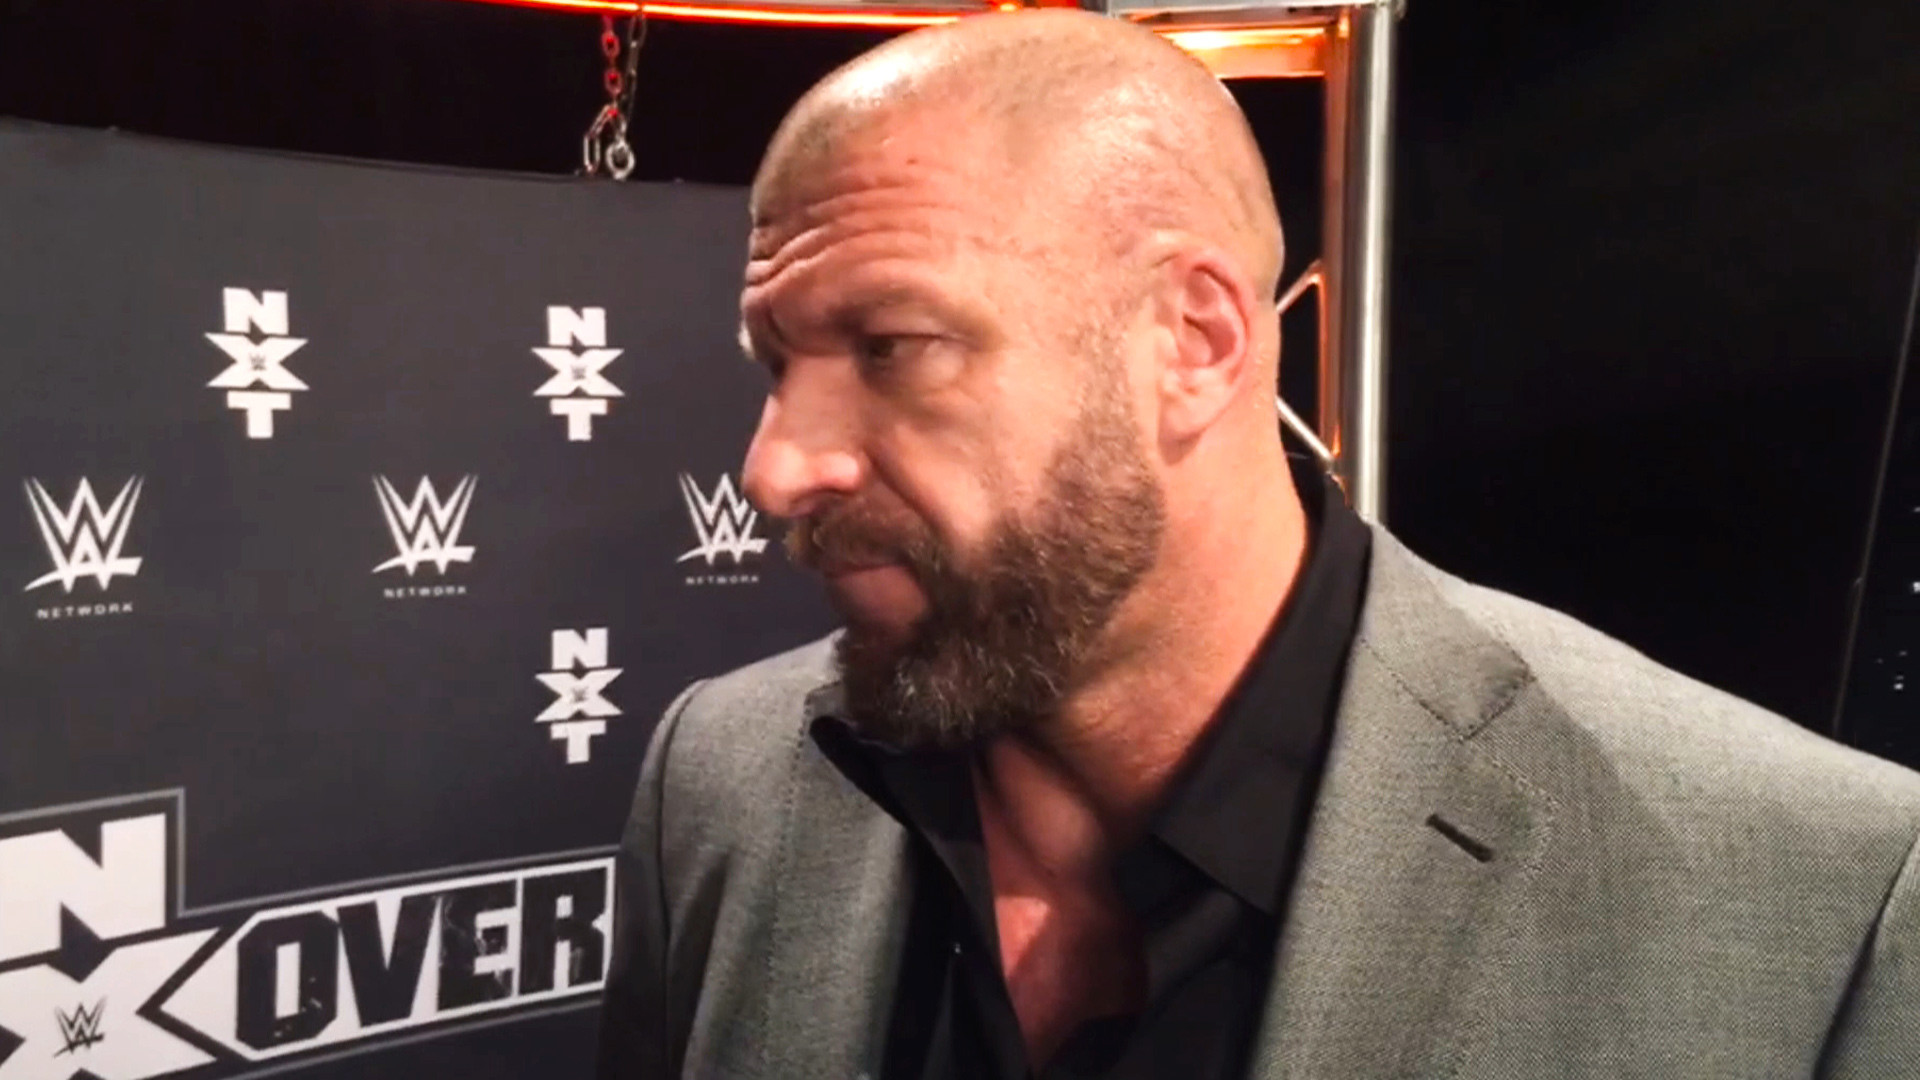 1920x1080 Triple H Warns Seth Rollins That 'the Destroyer' is Coming | Wrestling-Edge